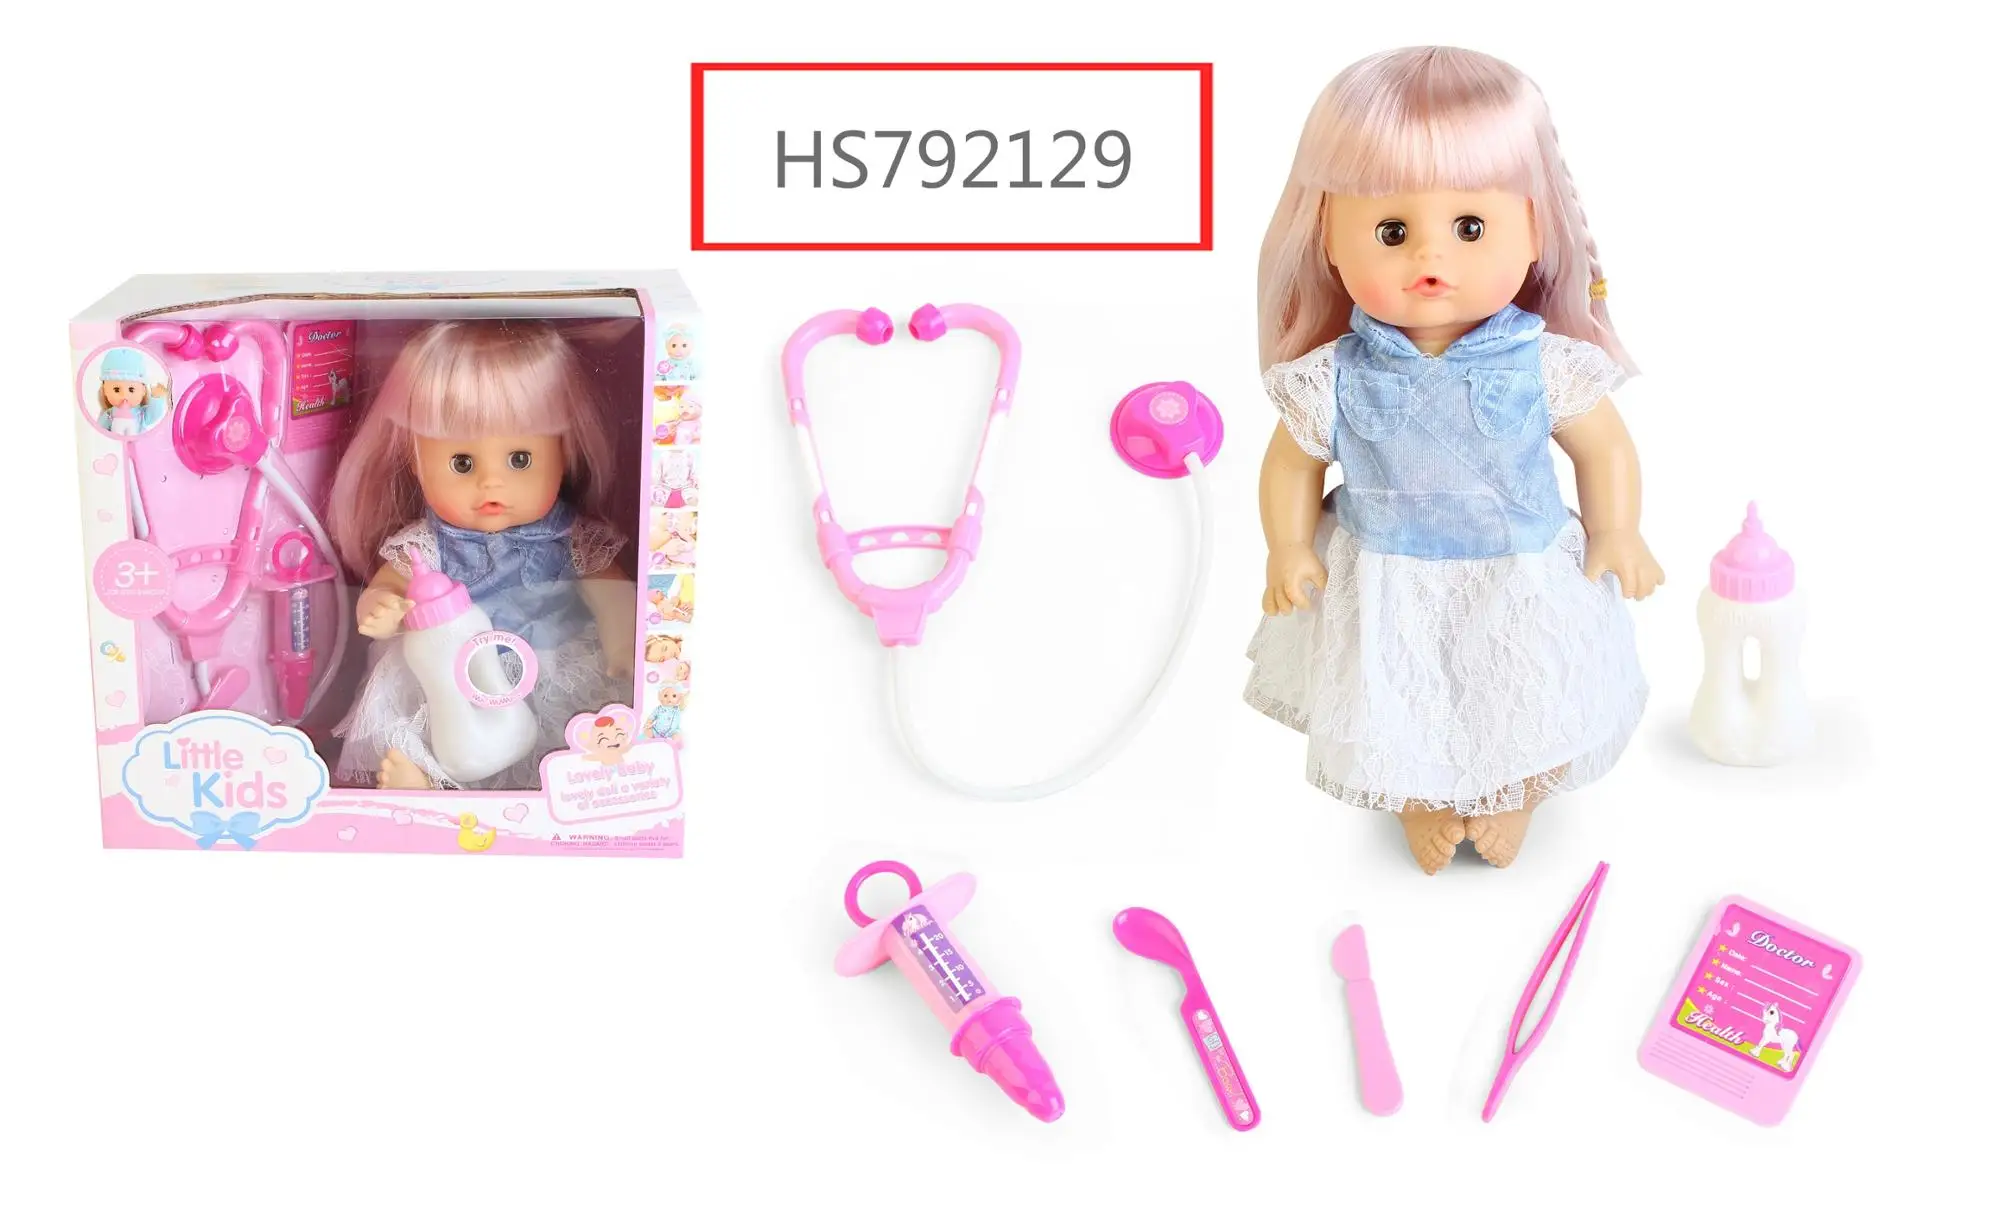 HS792129, Huwsin Toys, 13inch doll & doctor toy set for kids